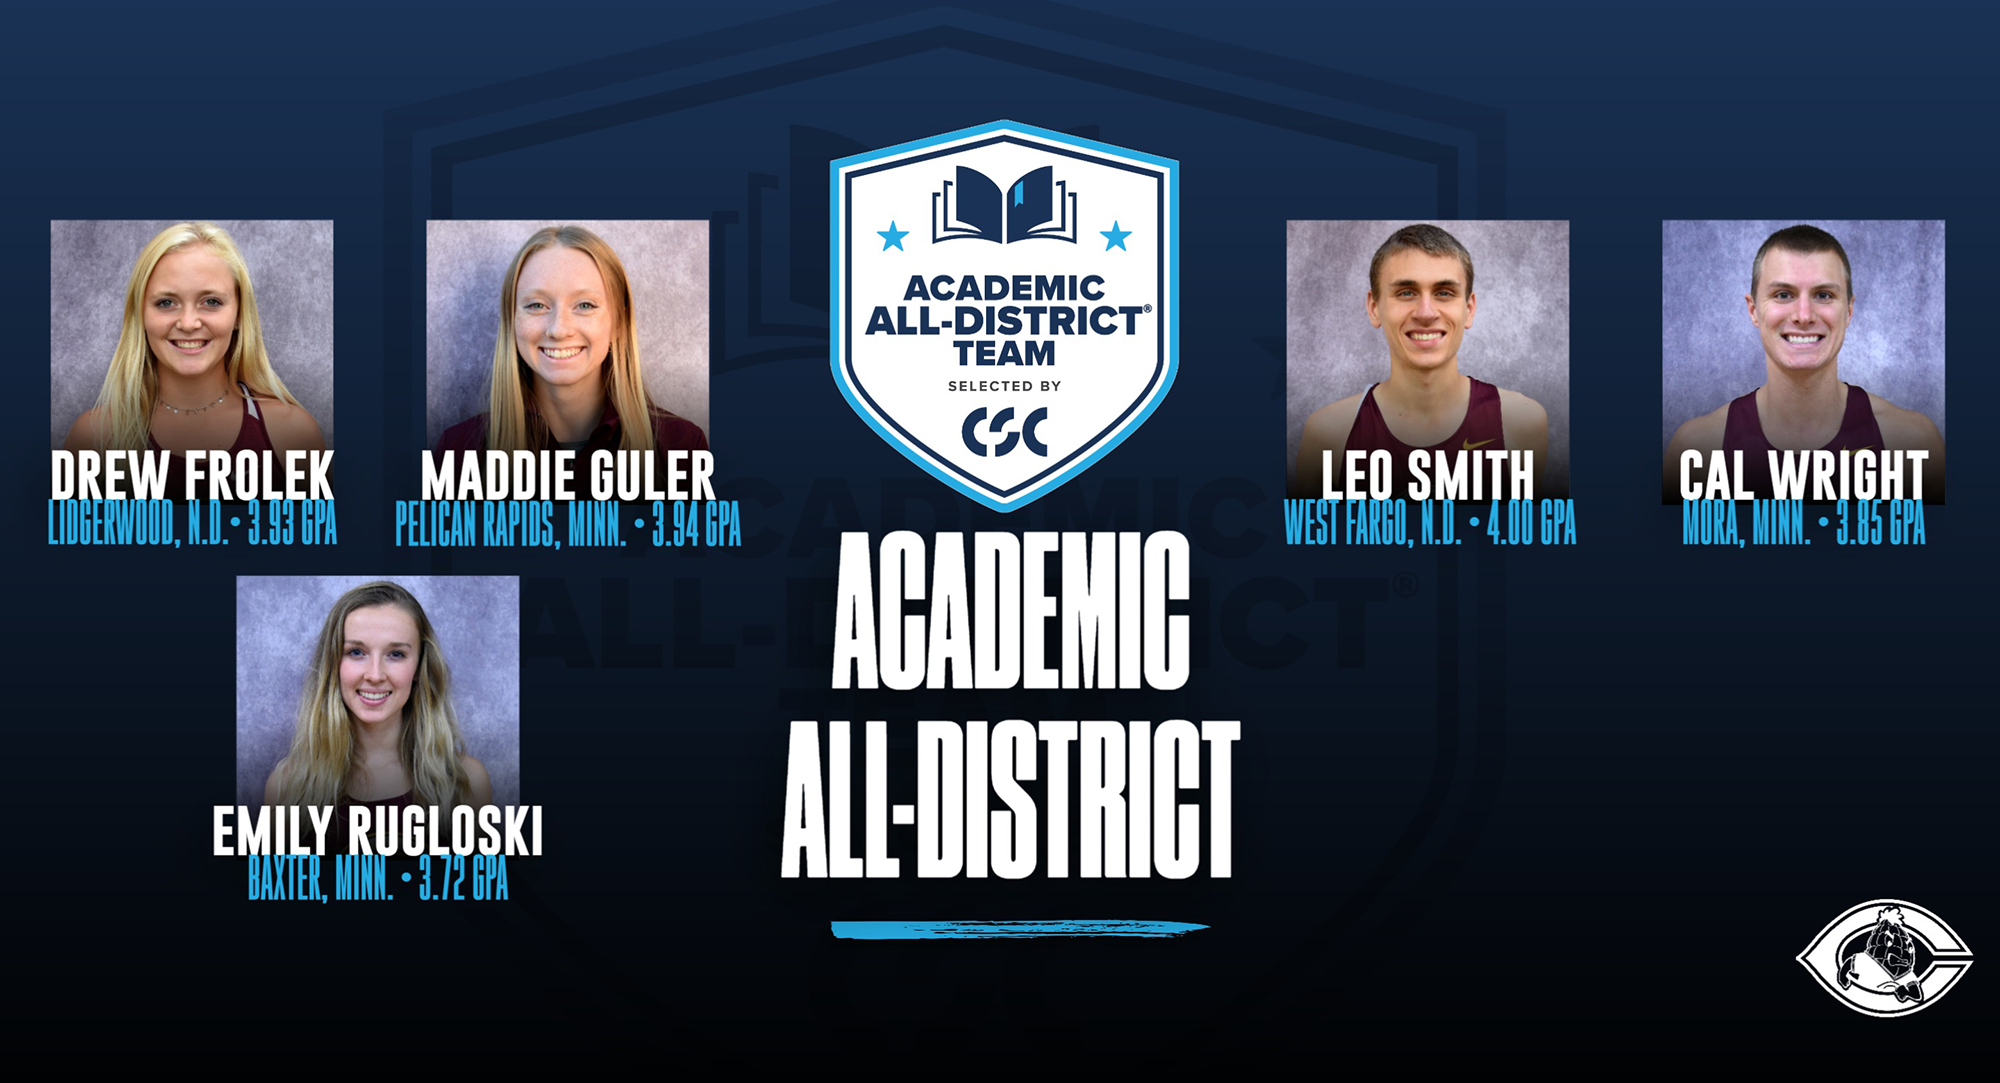 Drew Frolek, Maddie Guler, Emily Rugloski, Leo Smith and Cal Wright all received CSC Academic All-District honors.